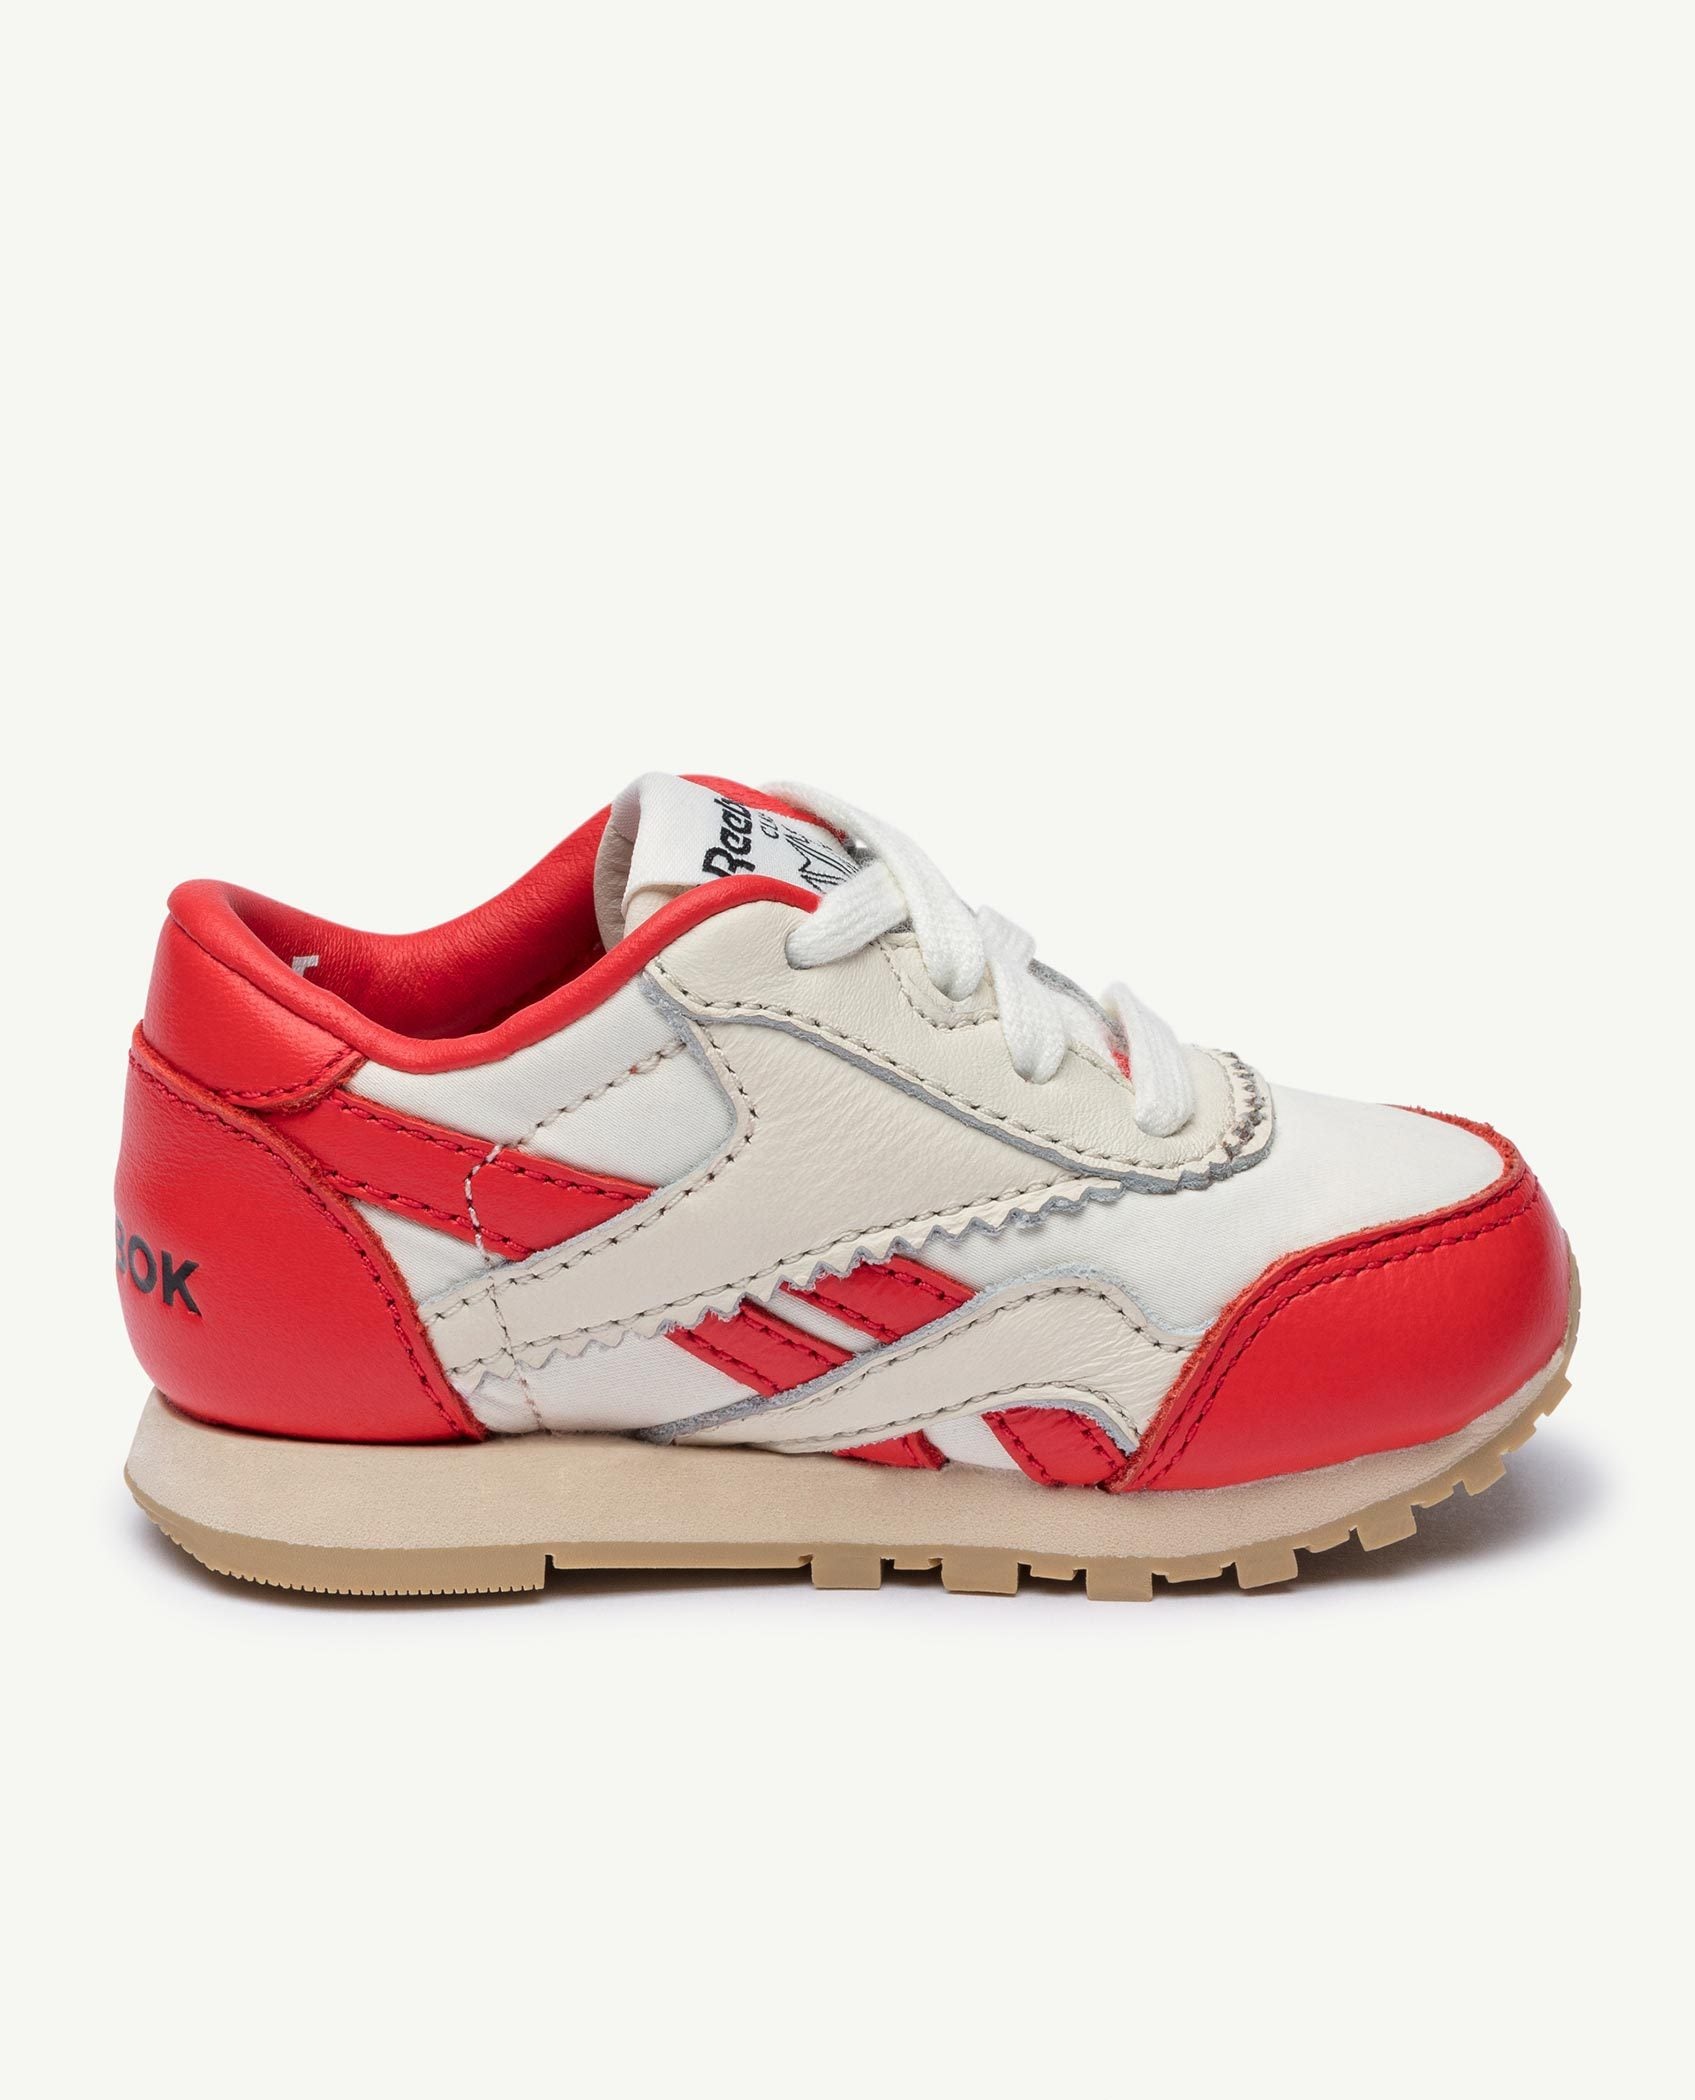 Reebok x The Animals Observatory Classic Nylon Red Baby PRODUCT BACK